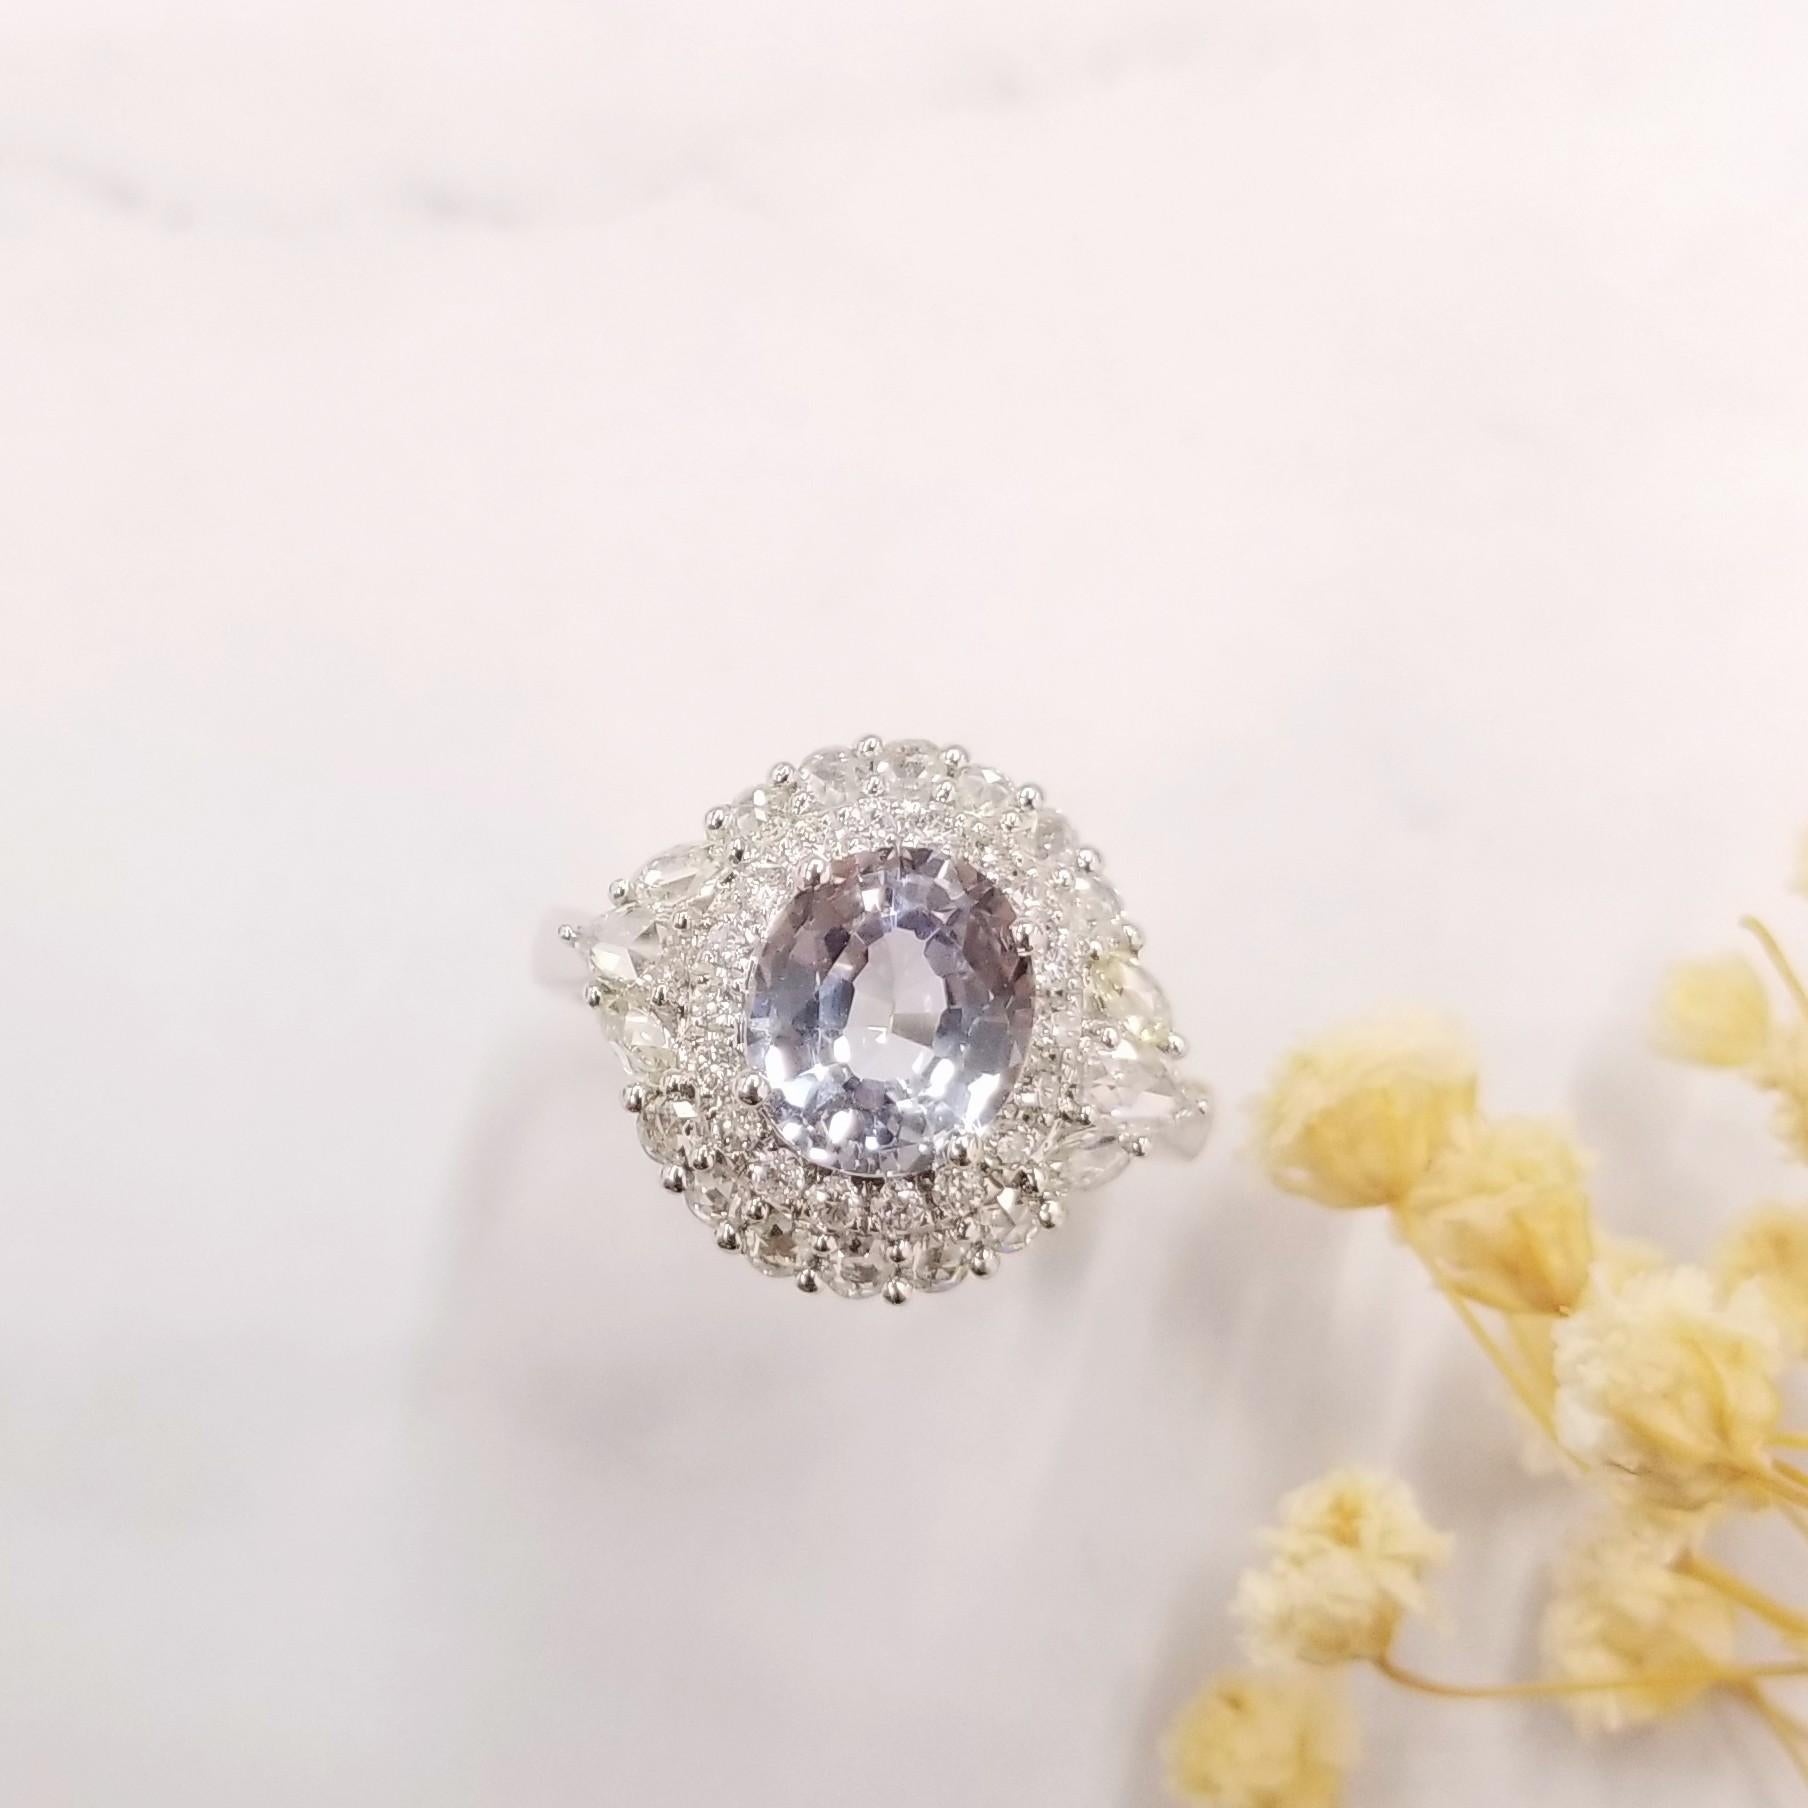 This unique, brilliant and exceptional cocktail ring features a spectacular unheated sapphire is designed by CADMUS in 18K white gold.
Accompanied by a IGI Report, this lightly colored sapphire is certified unheated, which is an extremely rare. 